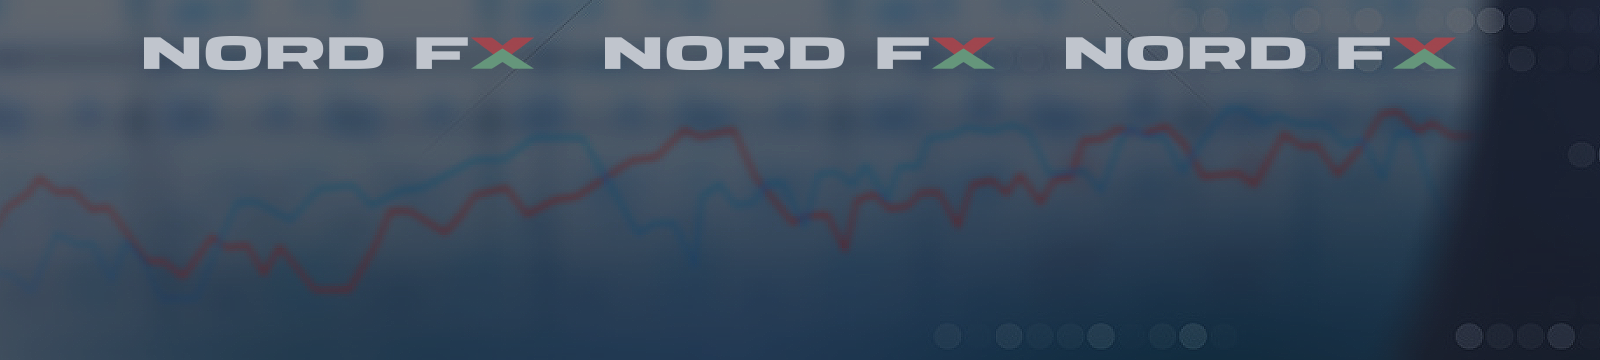 May Results: NordFX Trader Earns Over $50,000 on Bitcoin Collapse